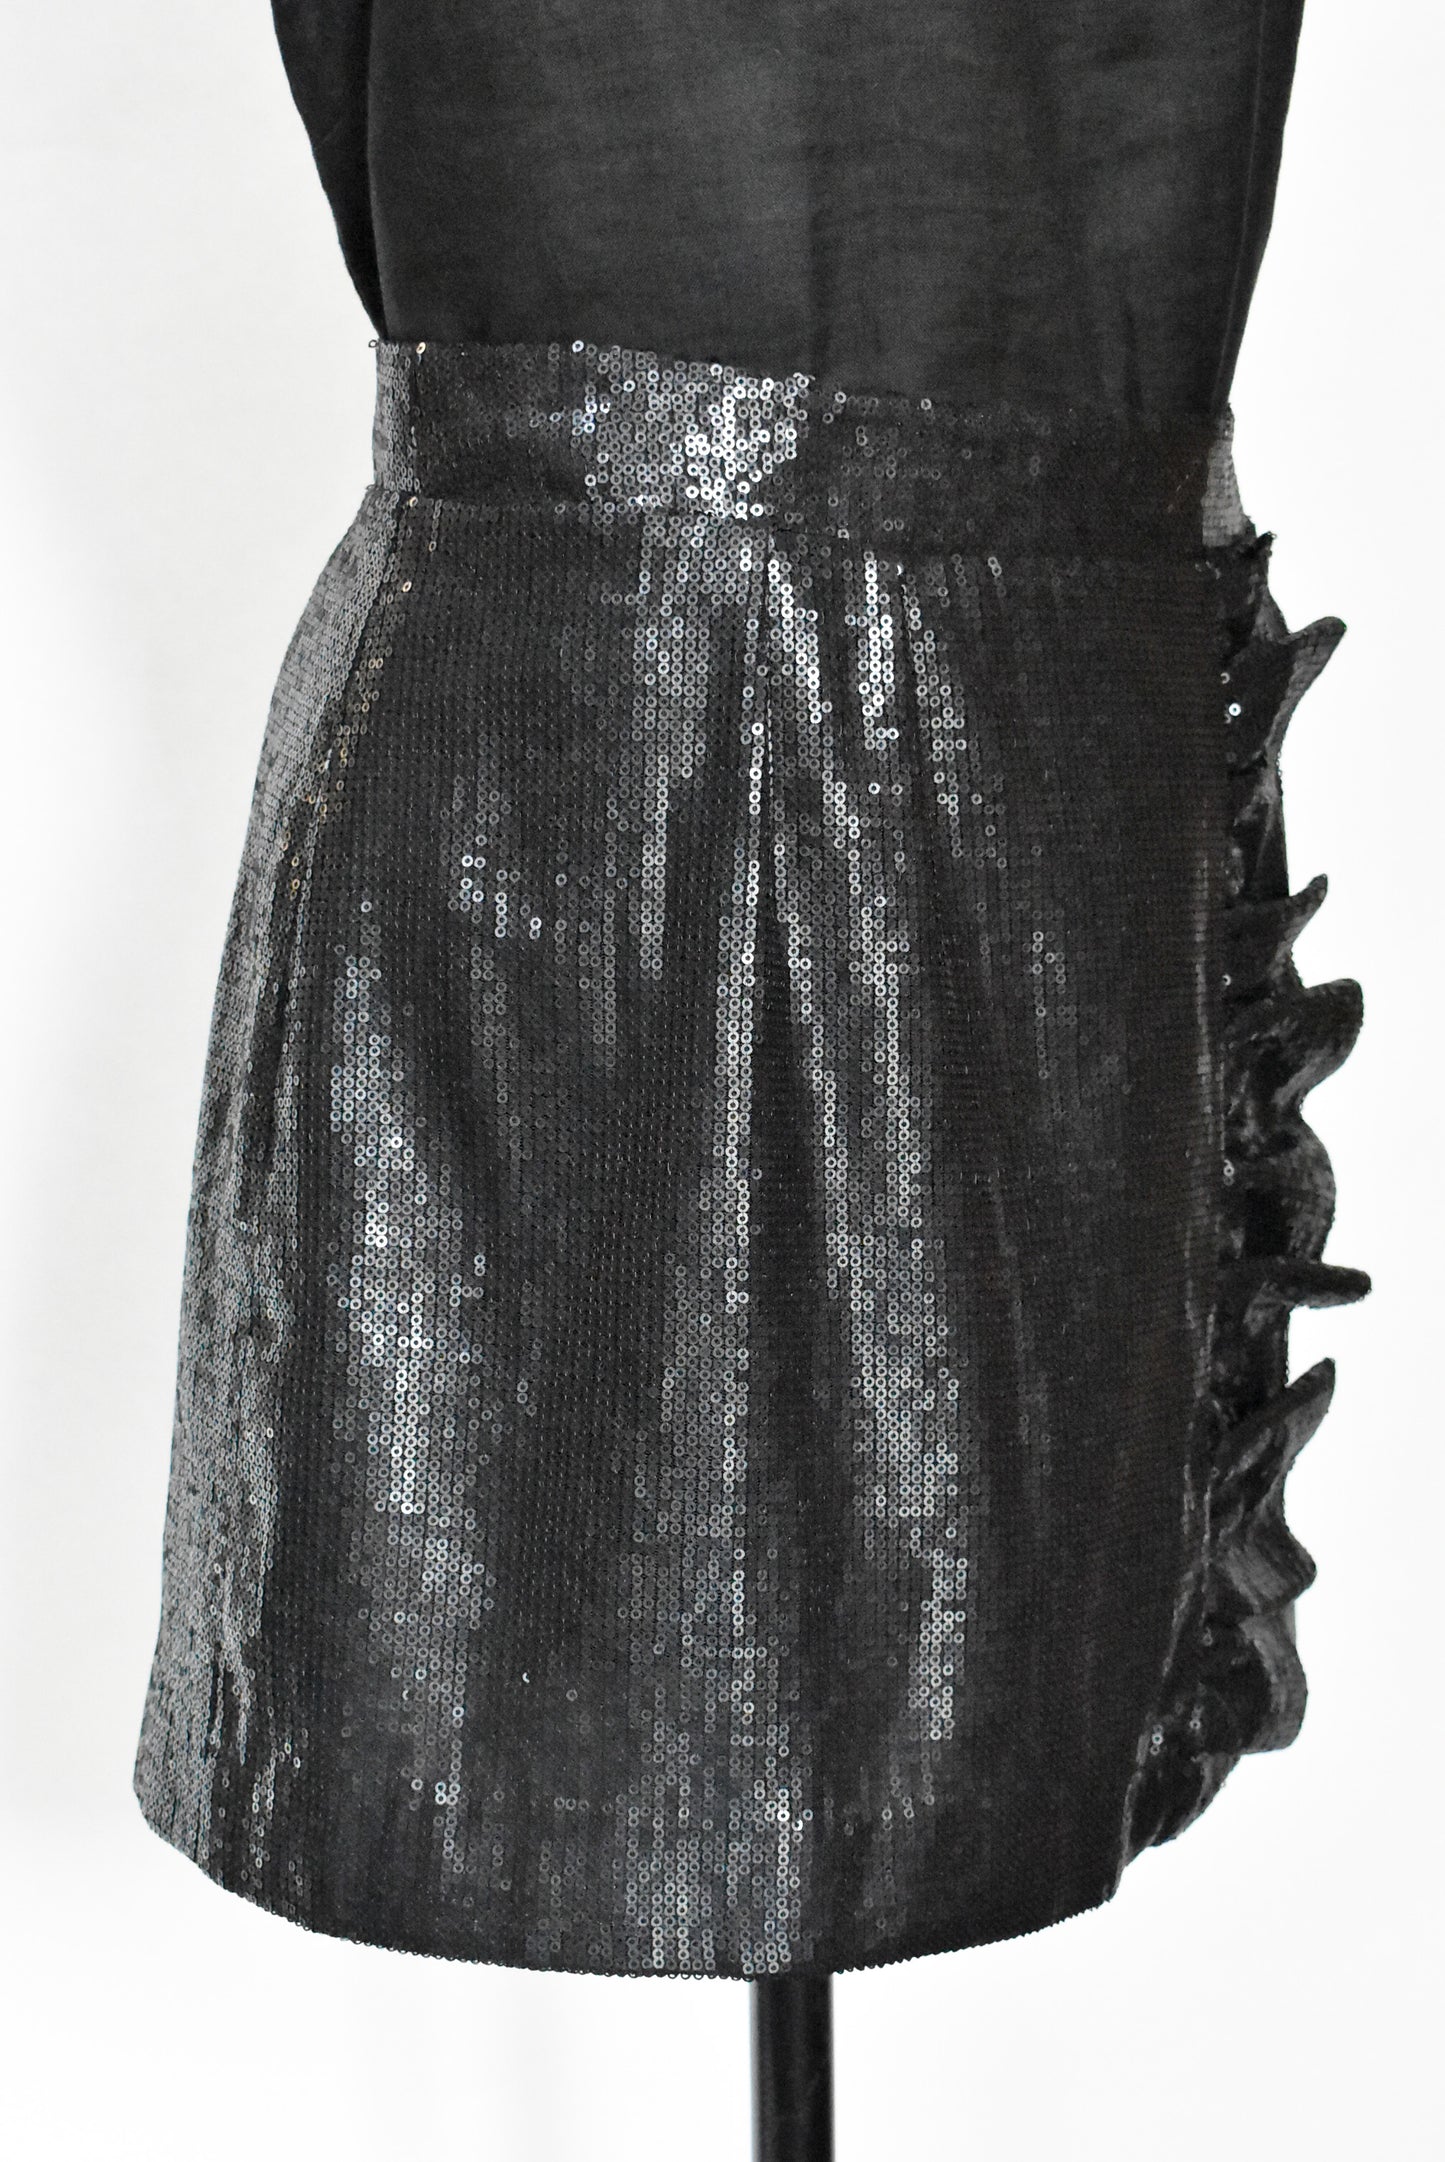 Witchery sequined skirt, 8